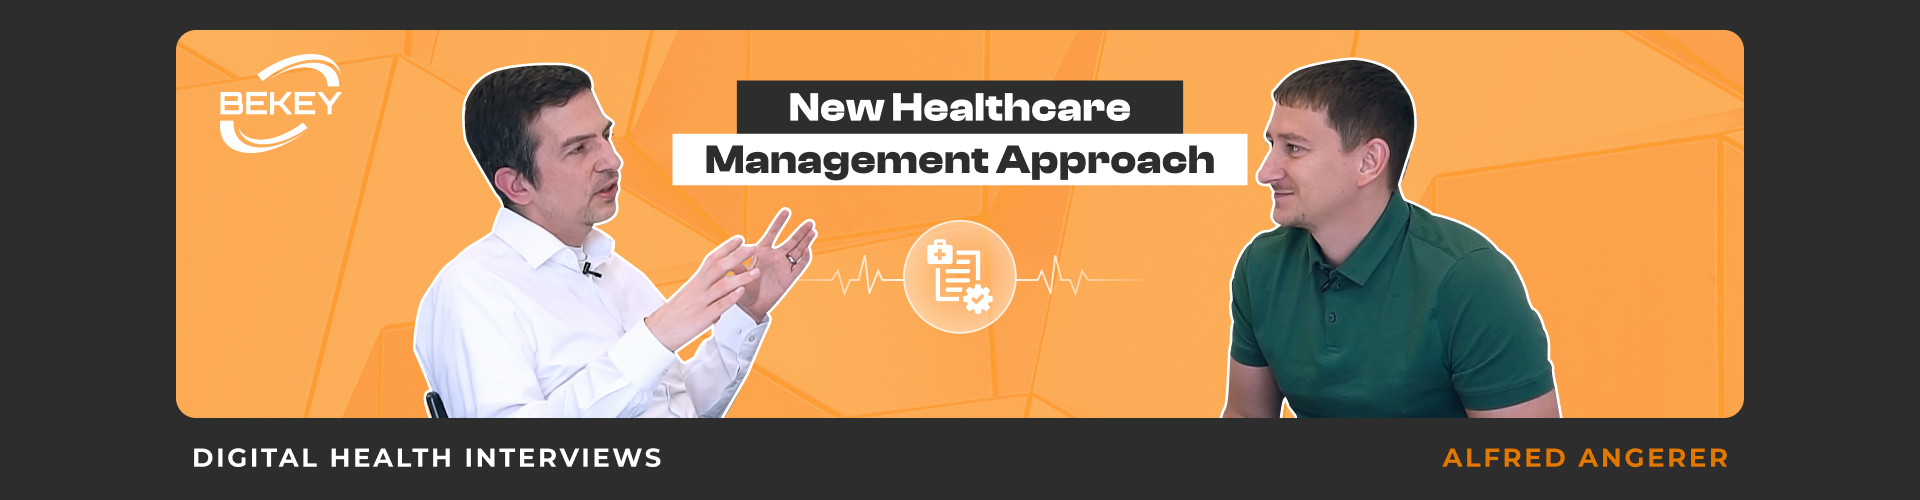 New Healthcare Management Approach. Digital Health Interviews: Alfred Angerer - image